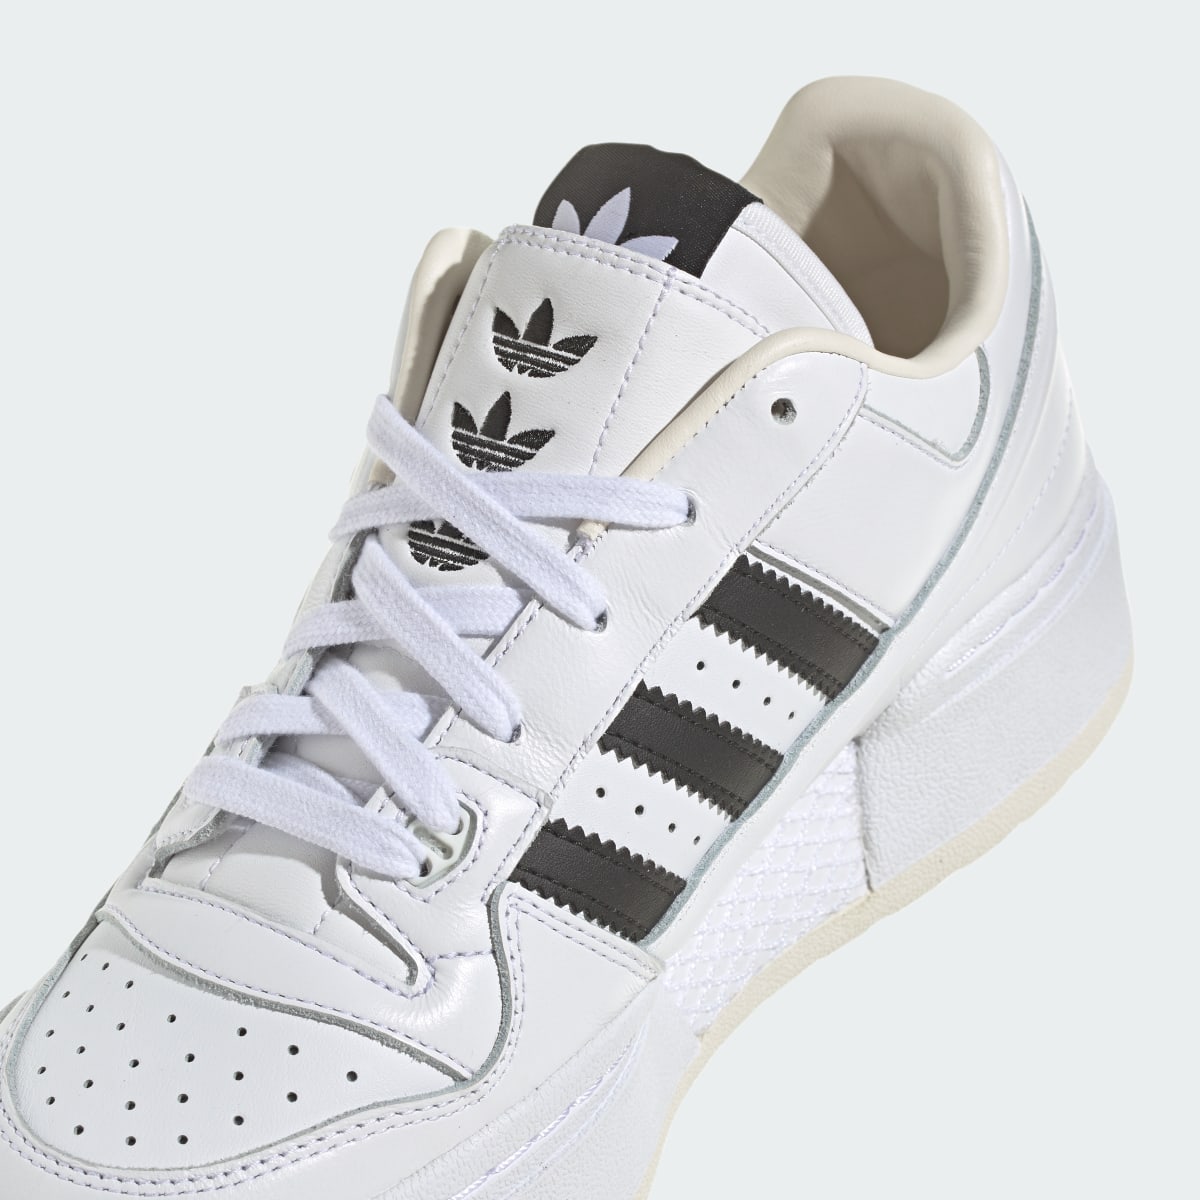 Adidas Forum XLG Shoes. 9